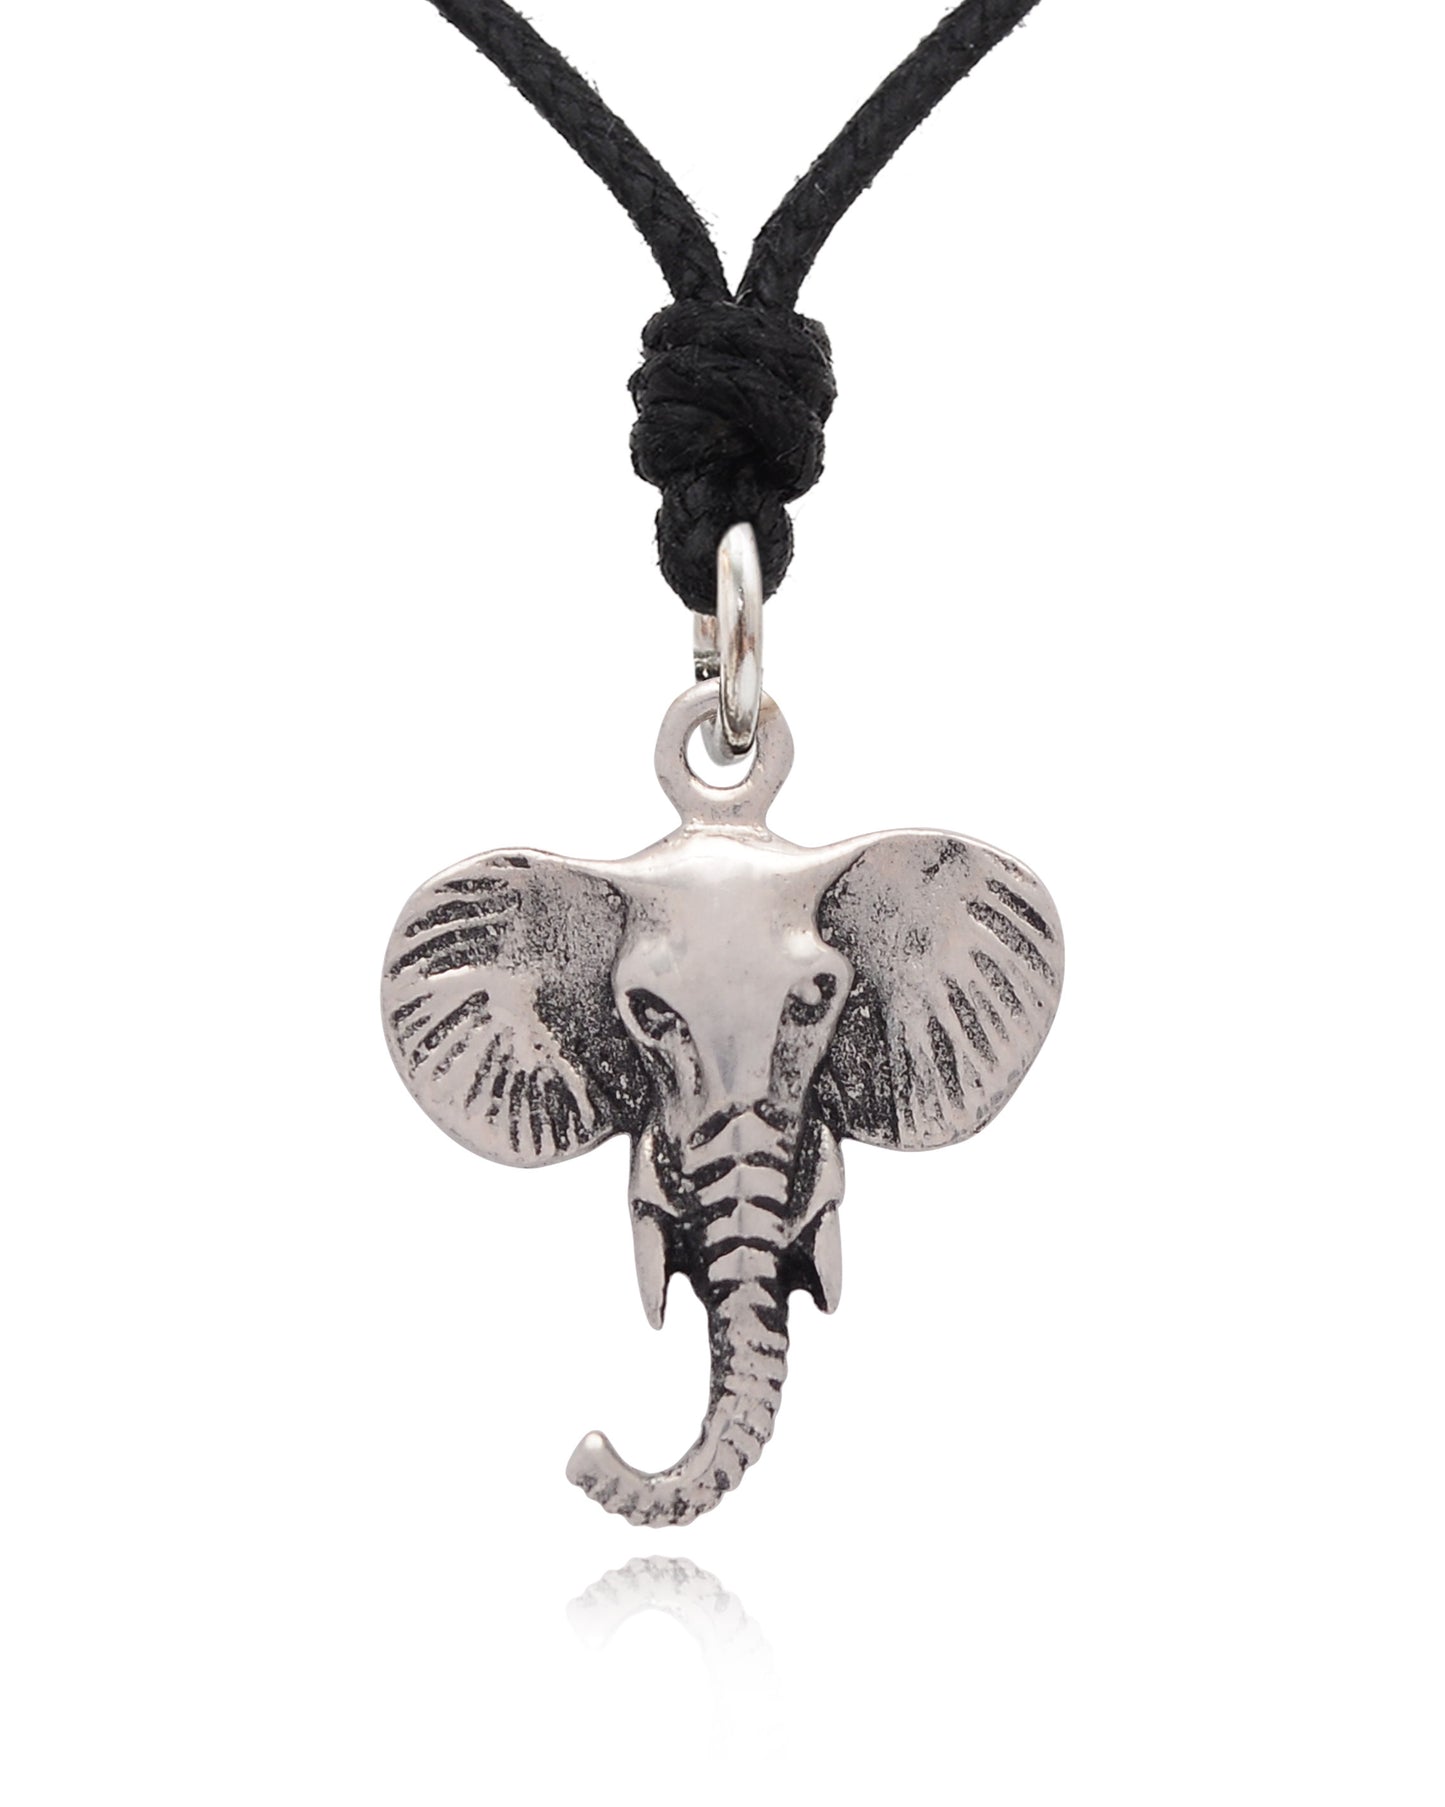 Elephant Face Silver Pewter Charm Necklace Pendant Jewelry With Cotton Cord